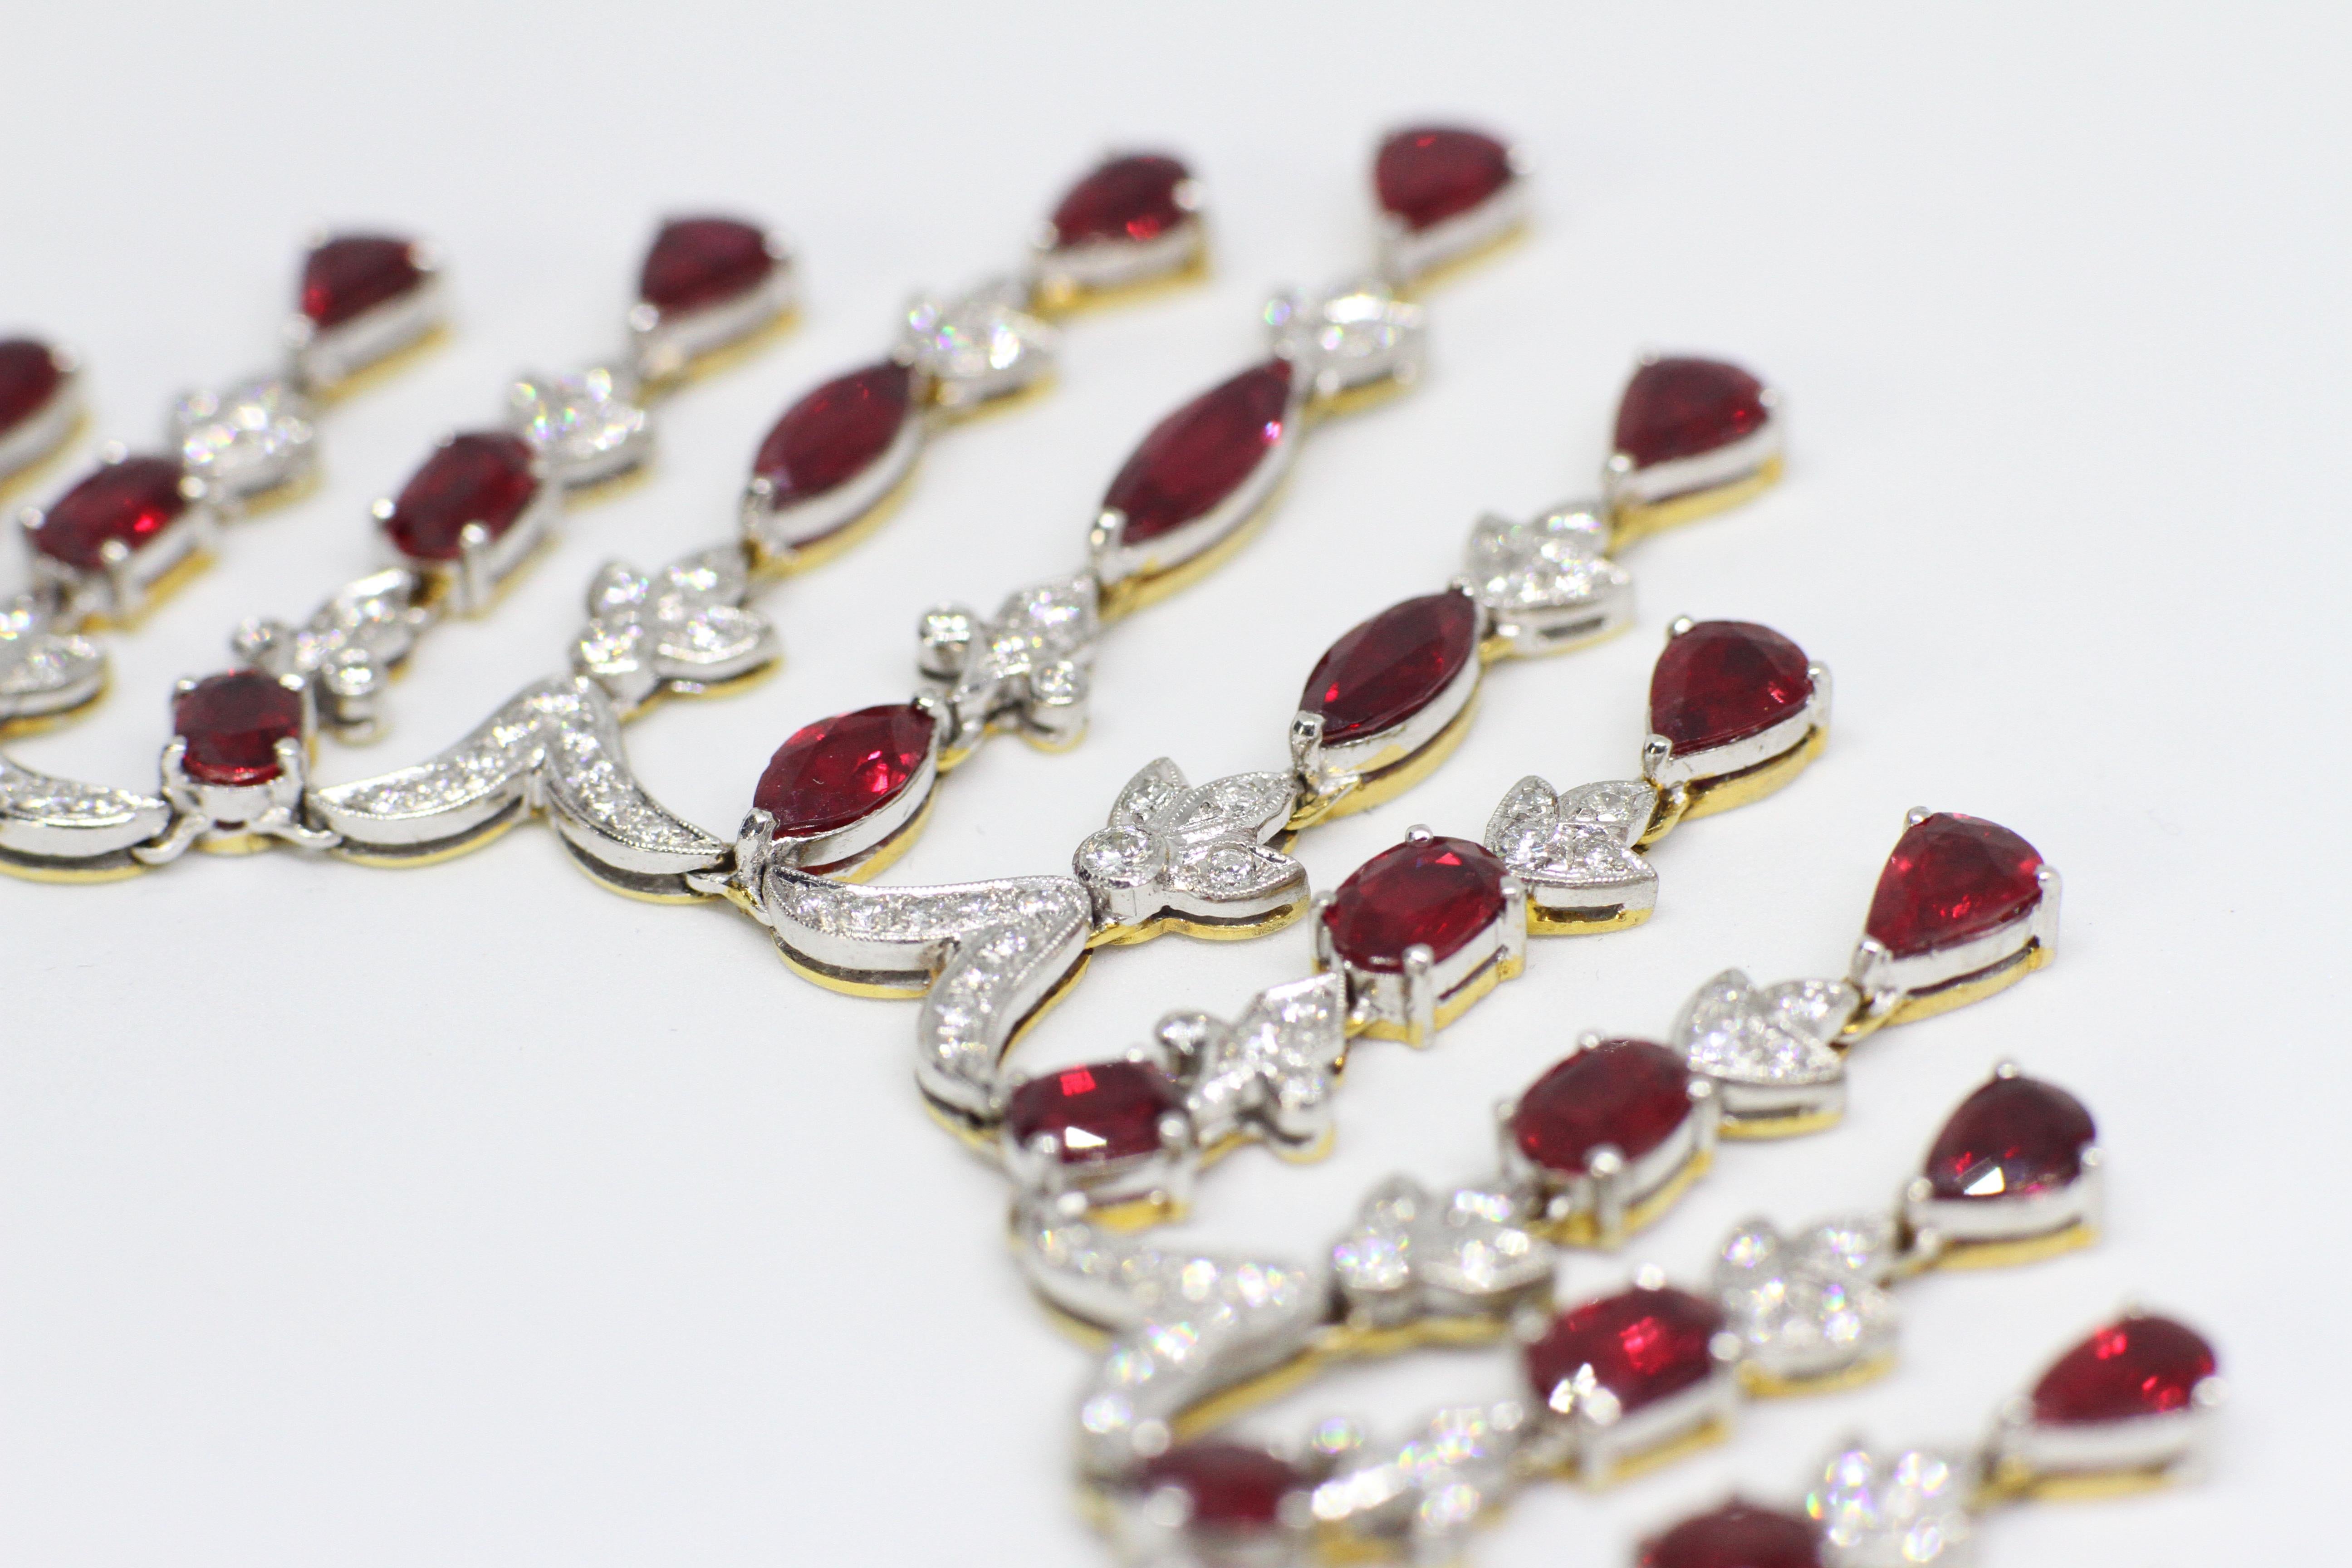 Spectacular ruby and diamond necklace and earring set all in 18 carat white and yellow gold. They are both set with a total of sixty nine rubies - a combination of marquise, pear shaped, round and oval shaped rubies with a minimum approximate total